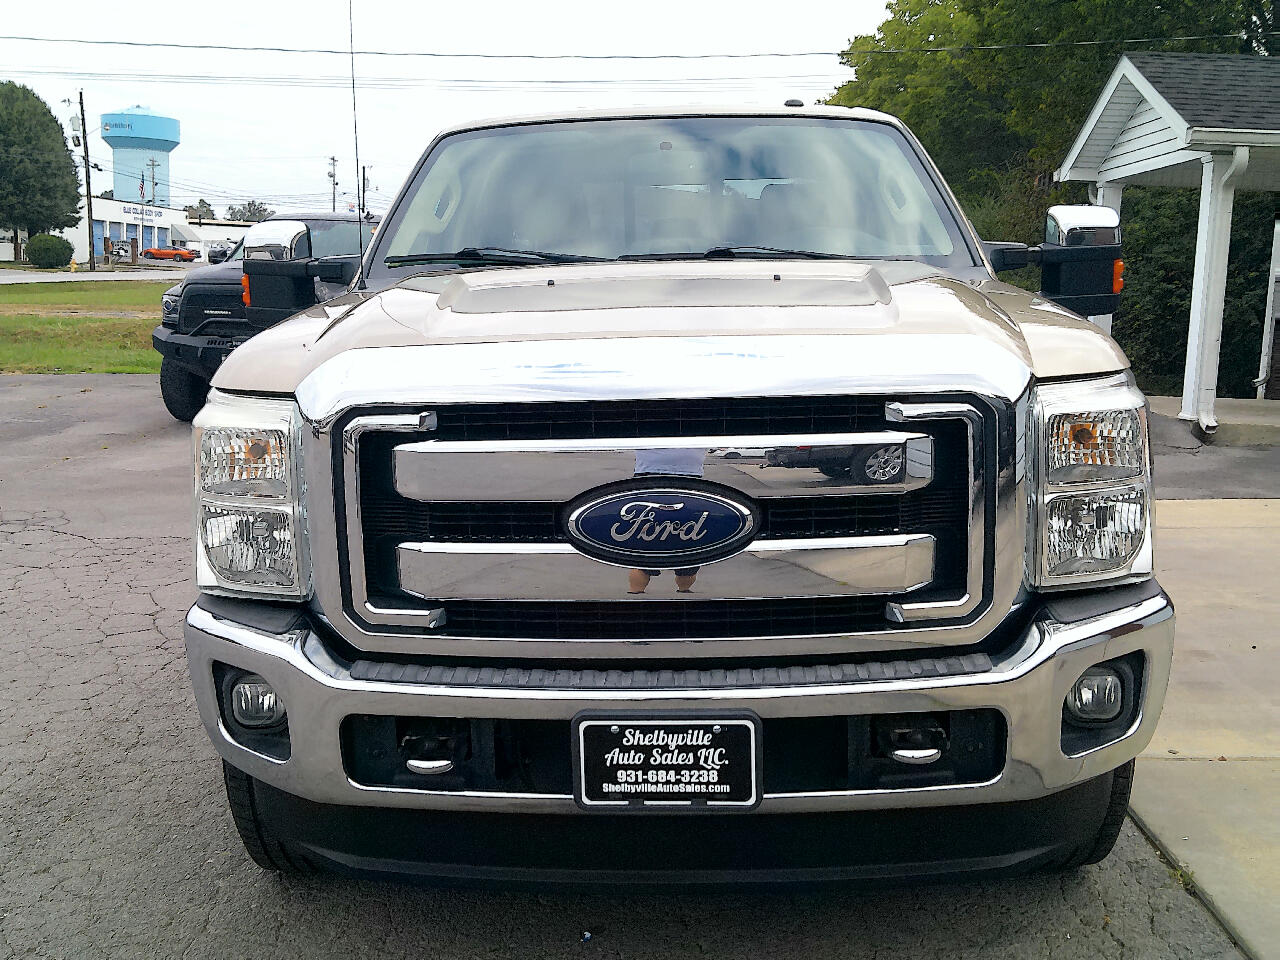 2013 Ford Super Duty F-250 VERY NICE4WDSTEP BARSHEATED AND COOLED SEATSTRAILER BRAKES